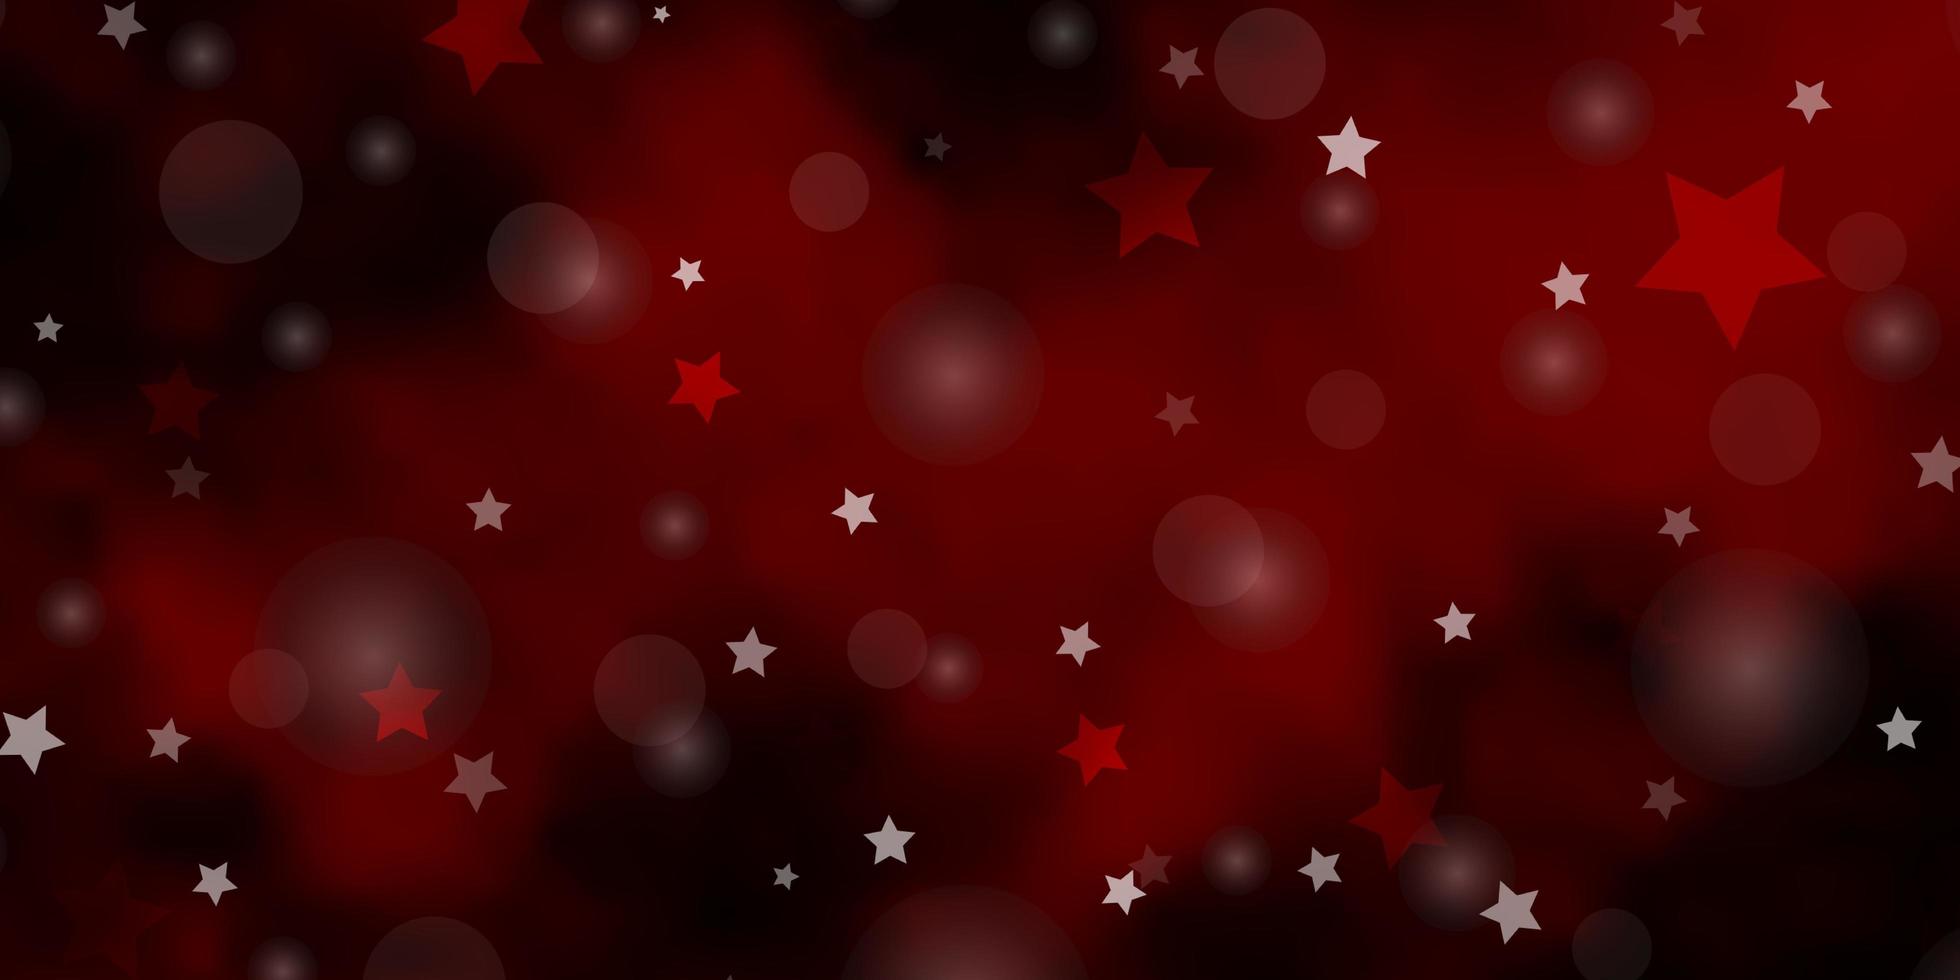 Dark Red vector background with circles stars Abstract illustration with colorful shapes of circles stars Pattern for trendy fabric wallpapers